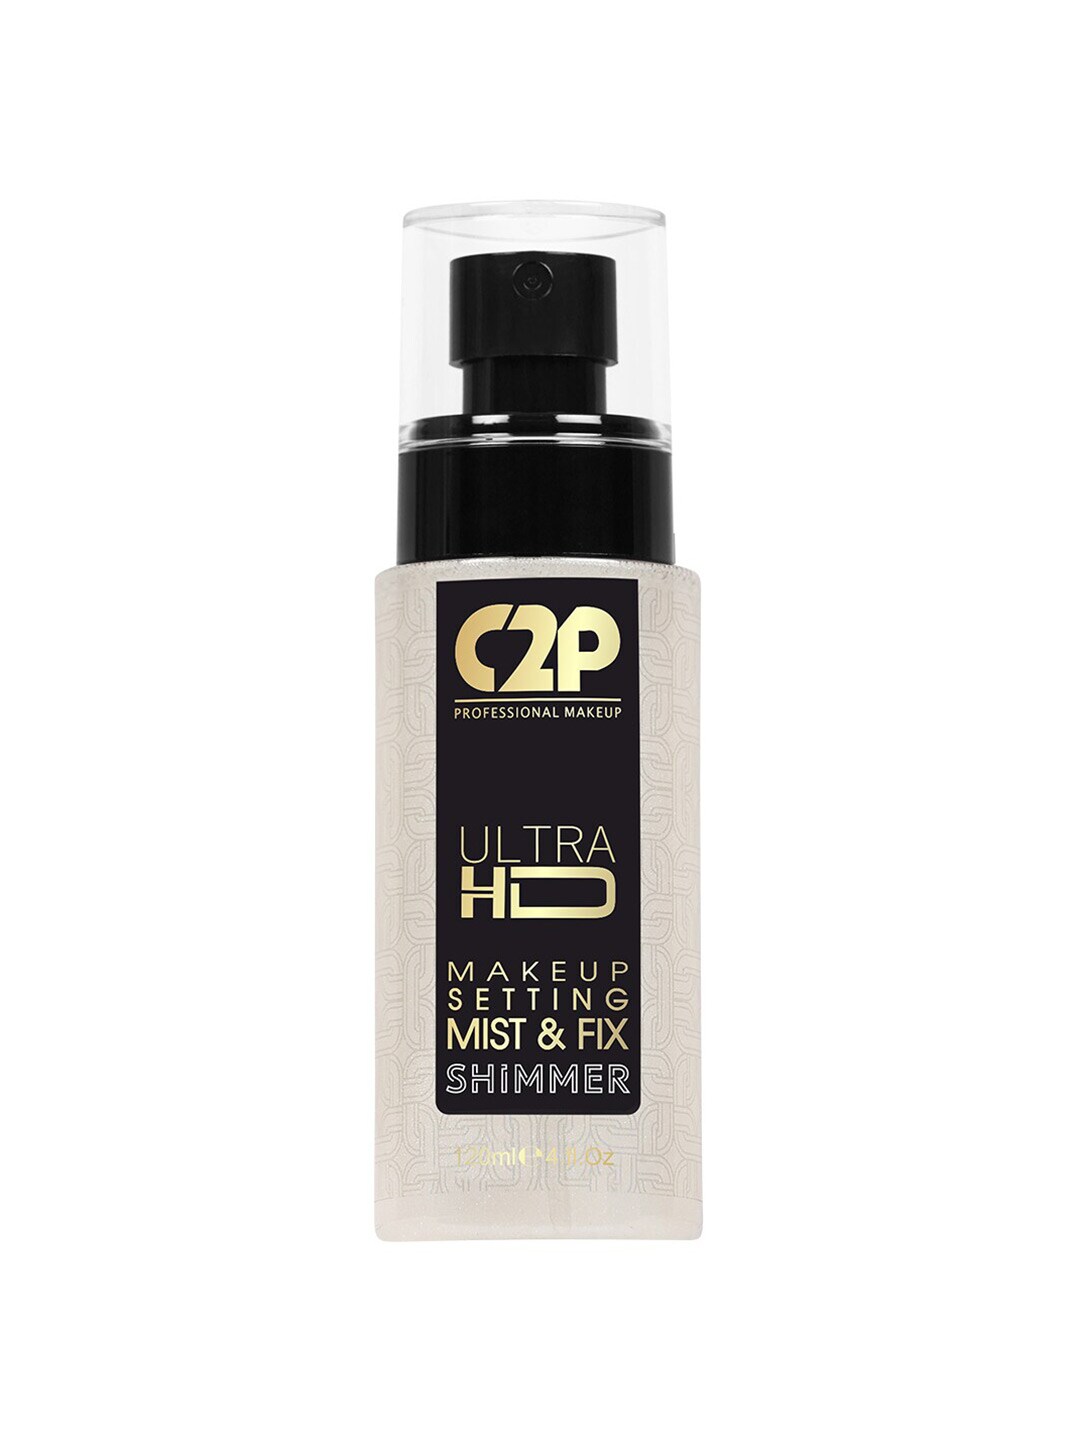 C2P PROFESSIONAL MAKEUP Ultra HD Makeup Setting Mist & Fix - Shimmer - Diamond Dust 01 Price in India